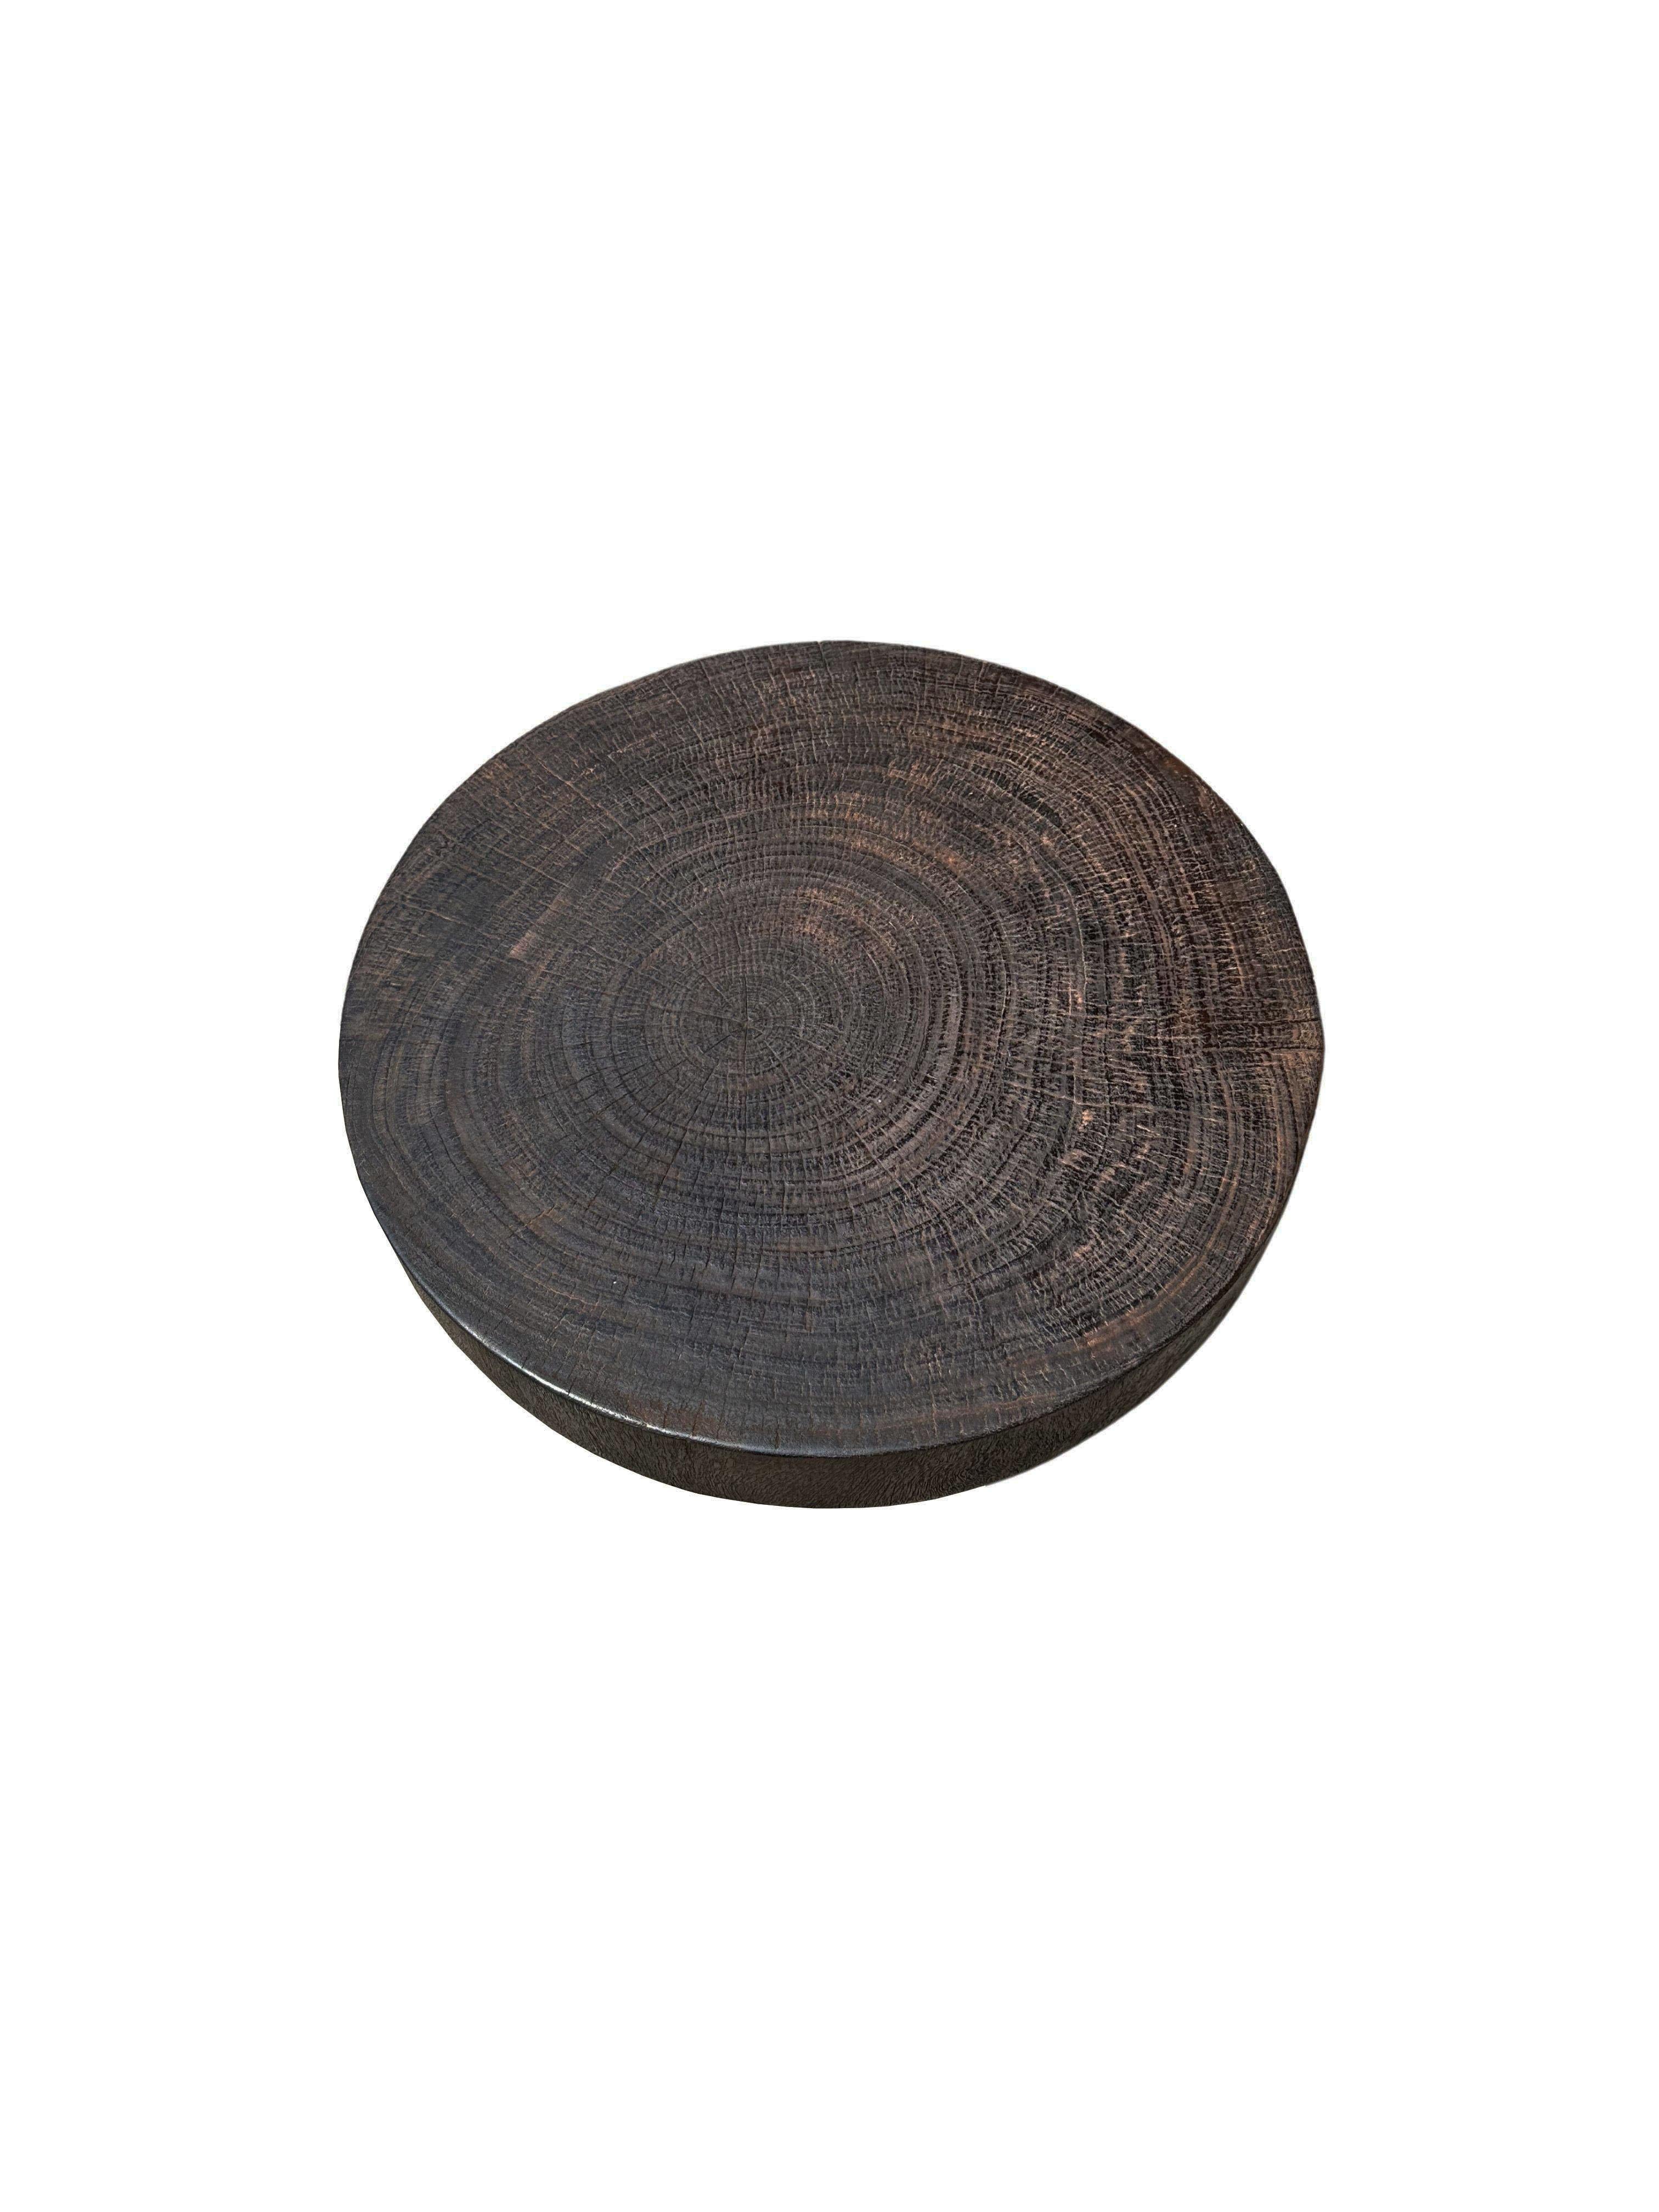 Hand-Crafted Sculptural Round Table Crafted from Solid Suar Wood, Natural Finish For Sale